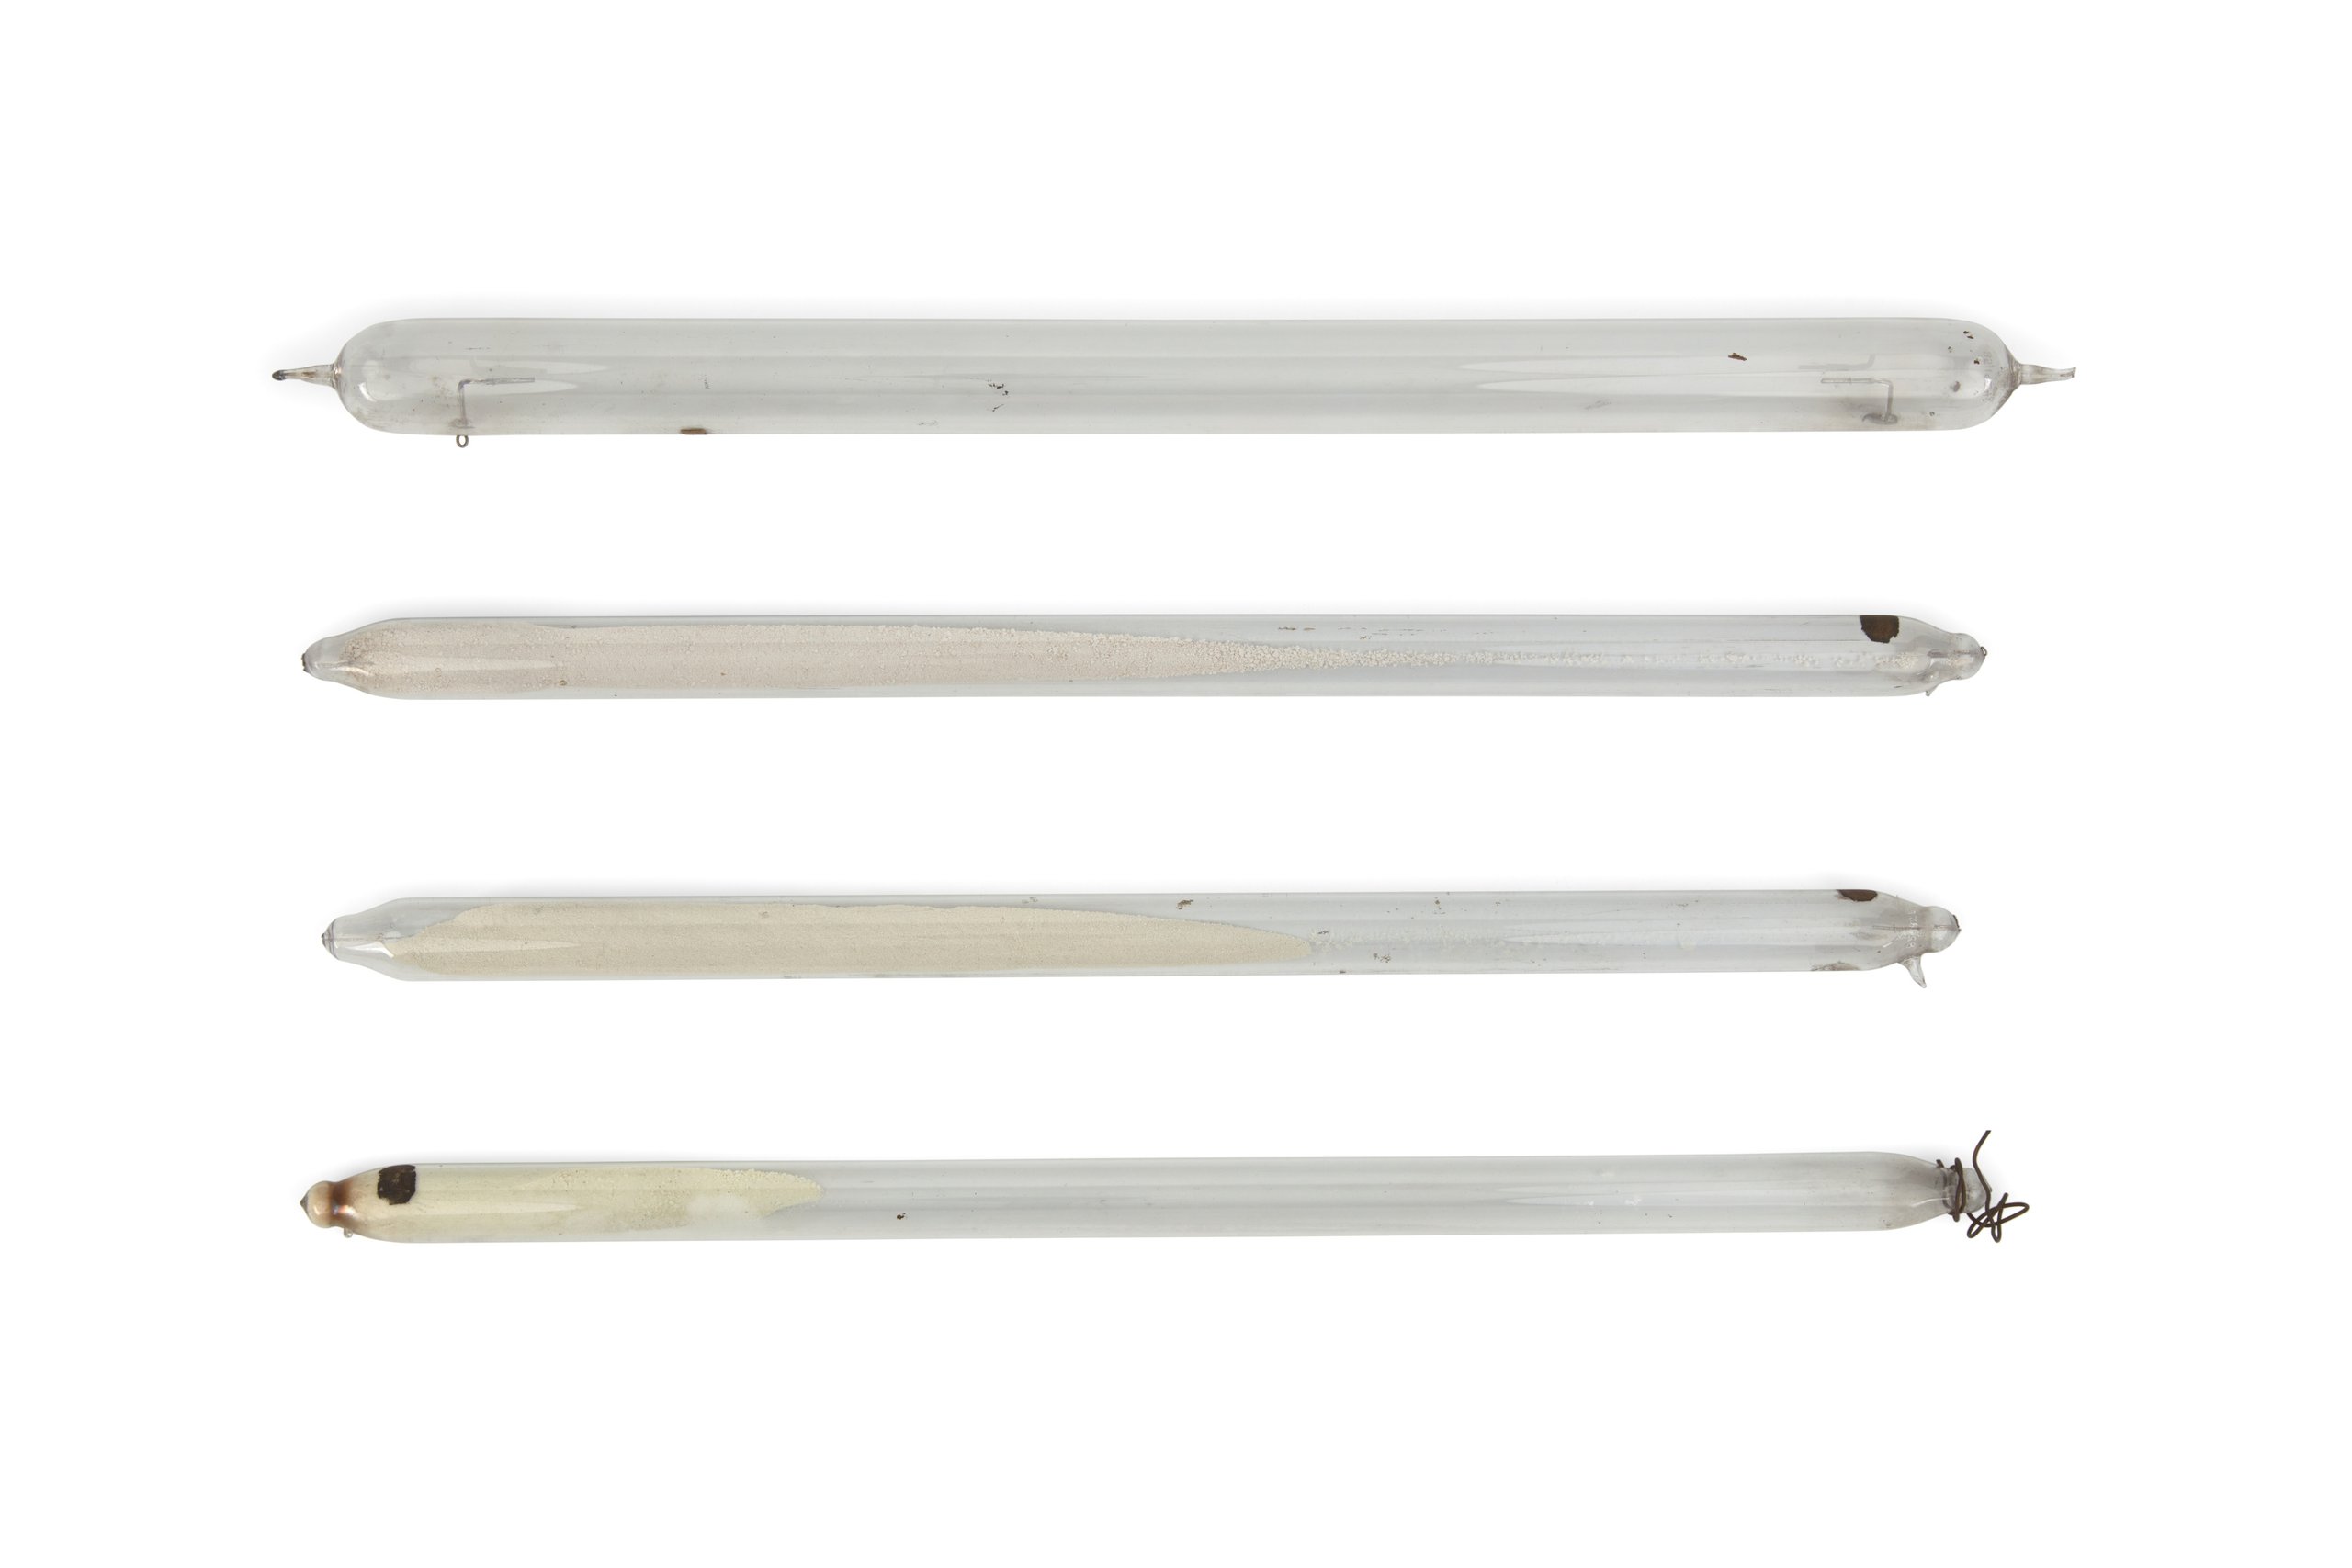 Three discharge tubes containing powders